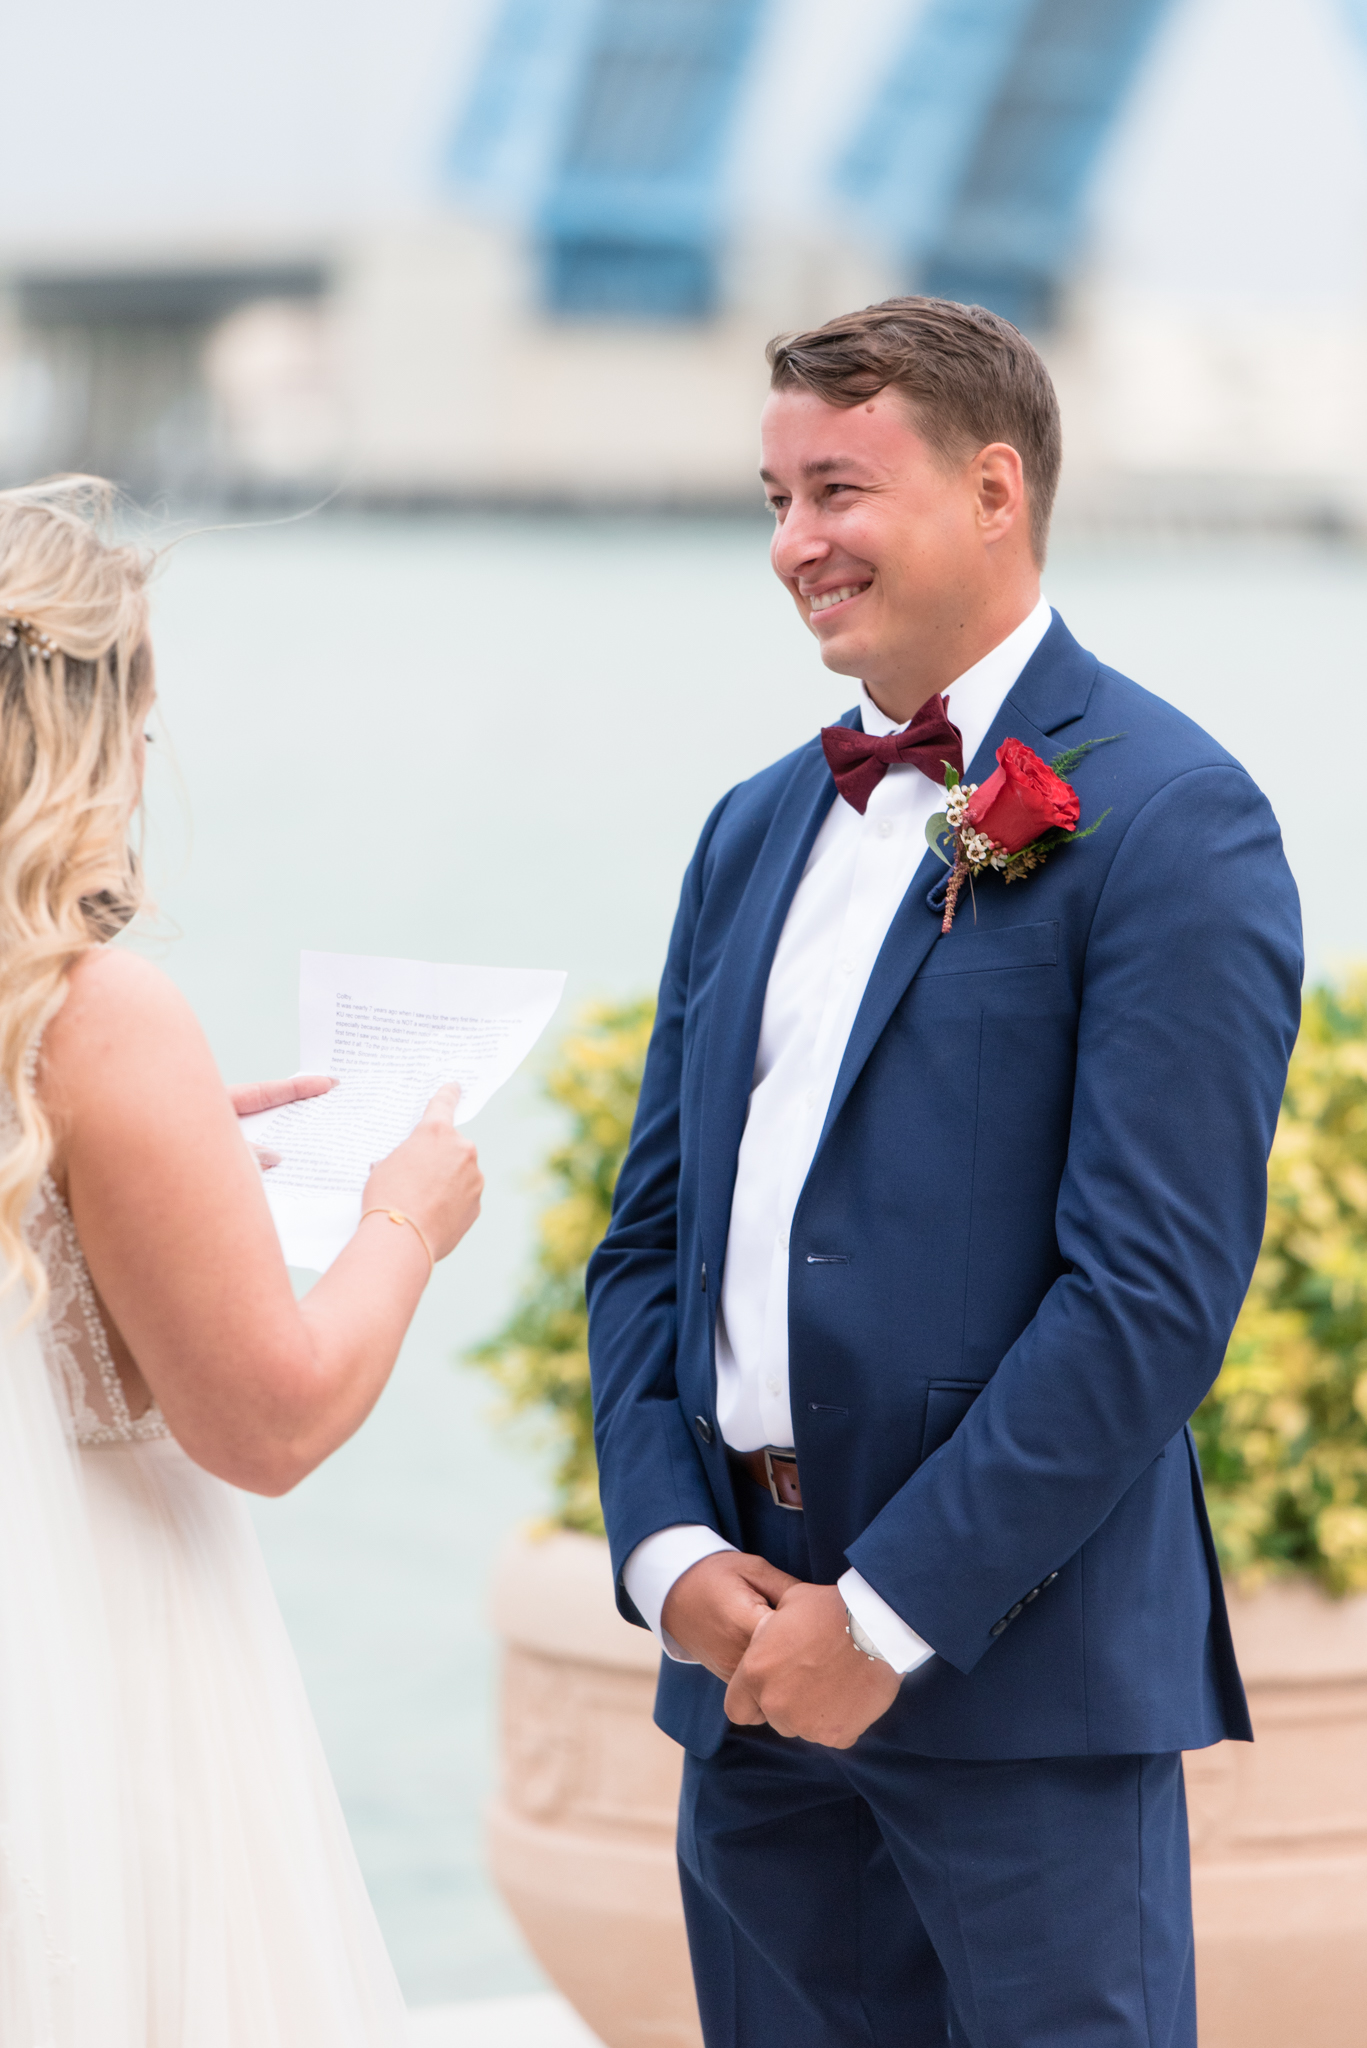 Groom laughs during wedding ceremony.